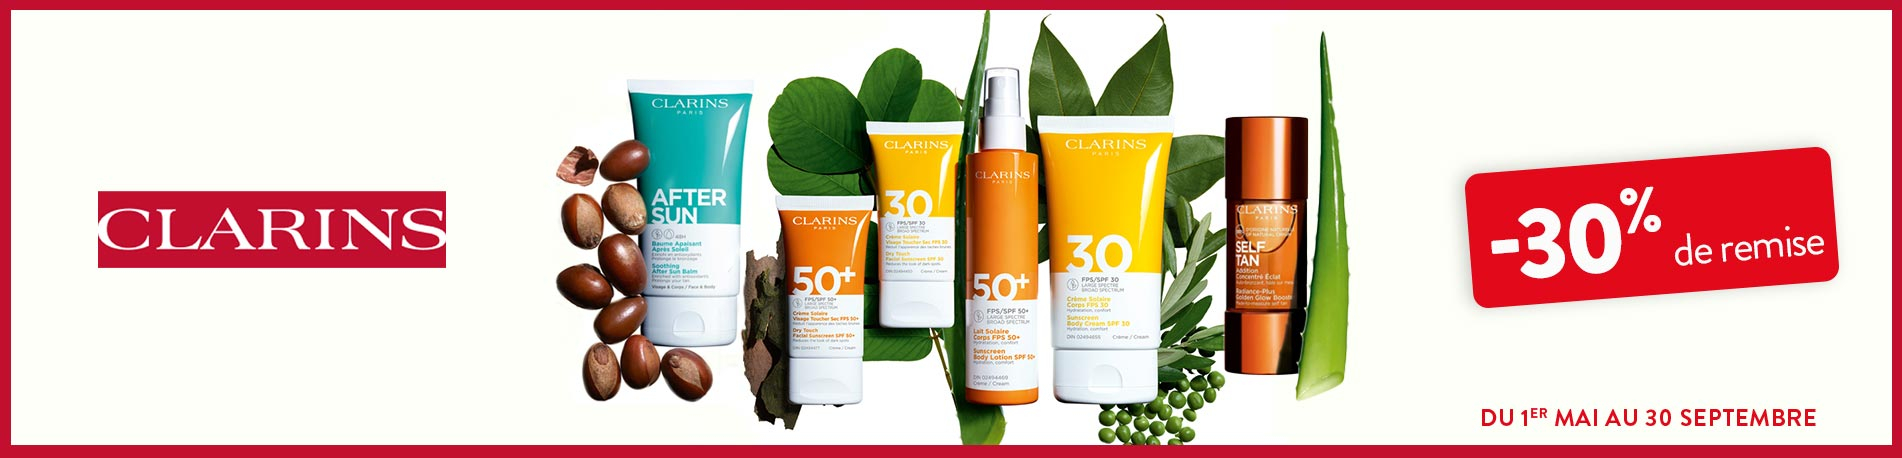 Promotion Clarins Solaire